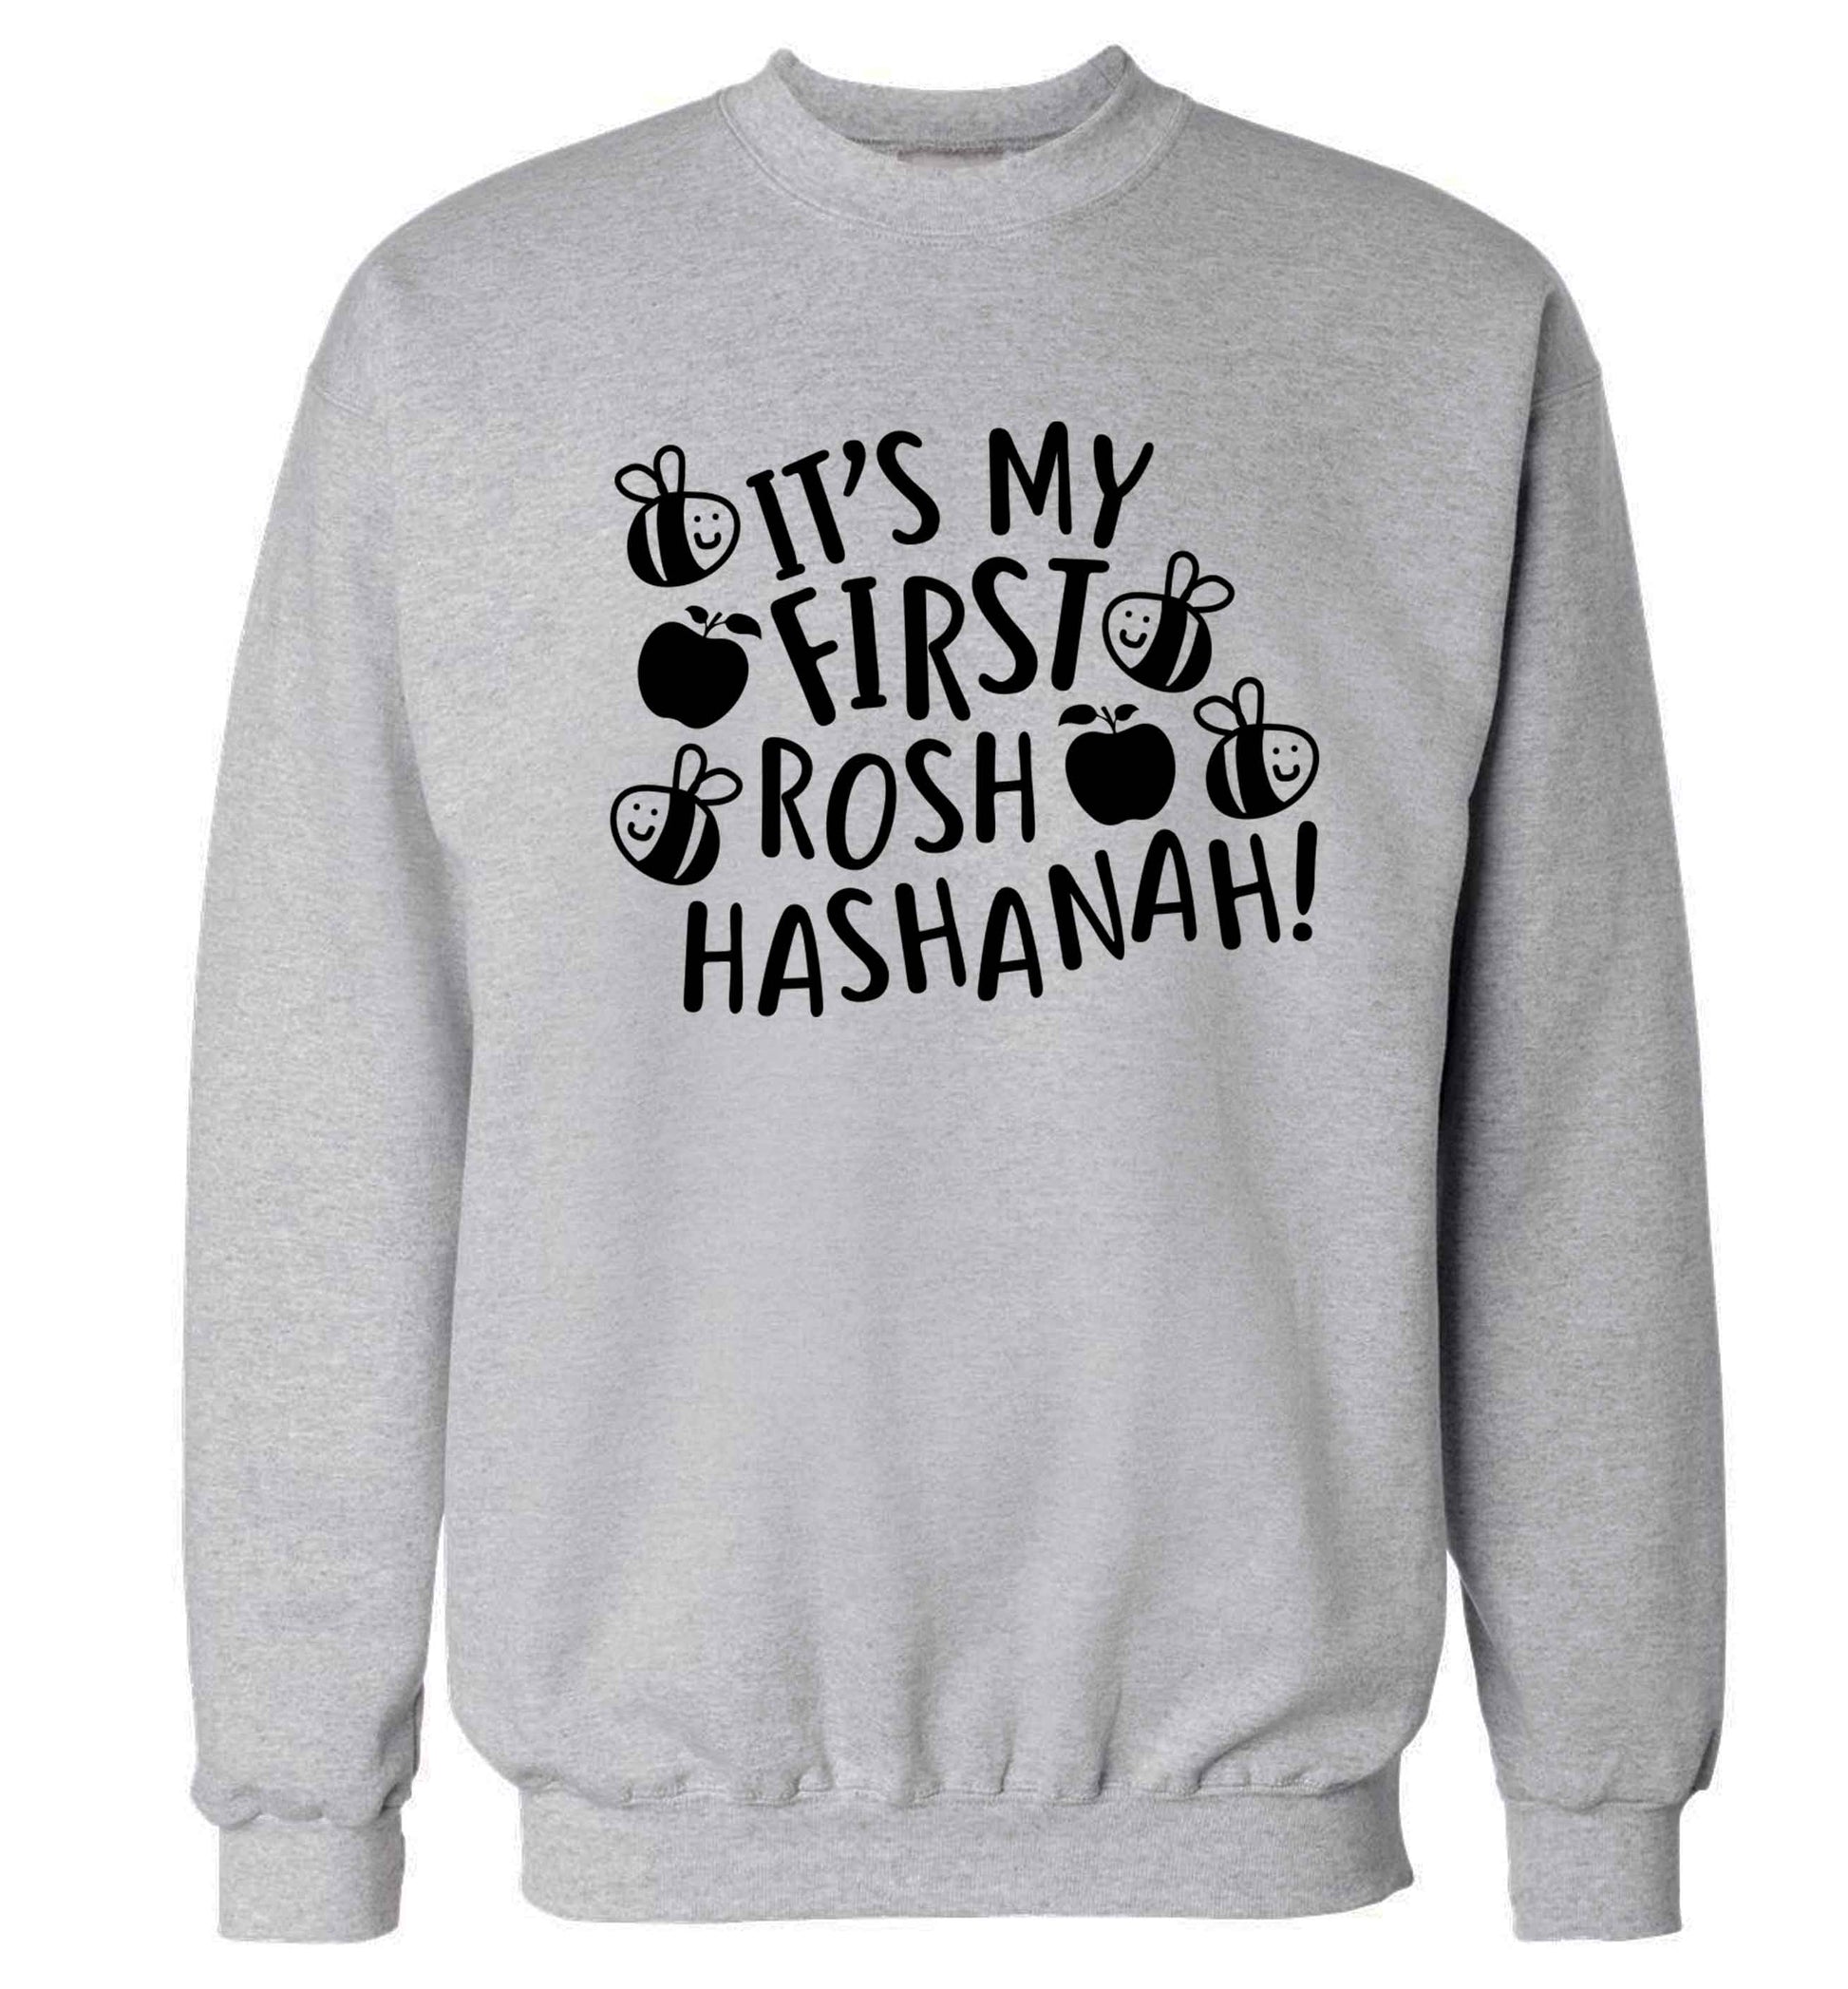 Its my first rosh hashanah Adult's unisex grey Sweater 2XL